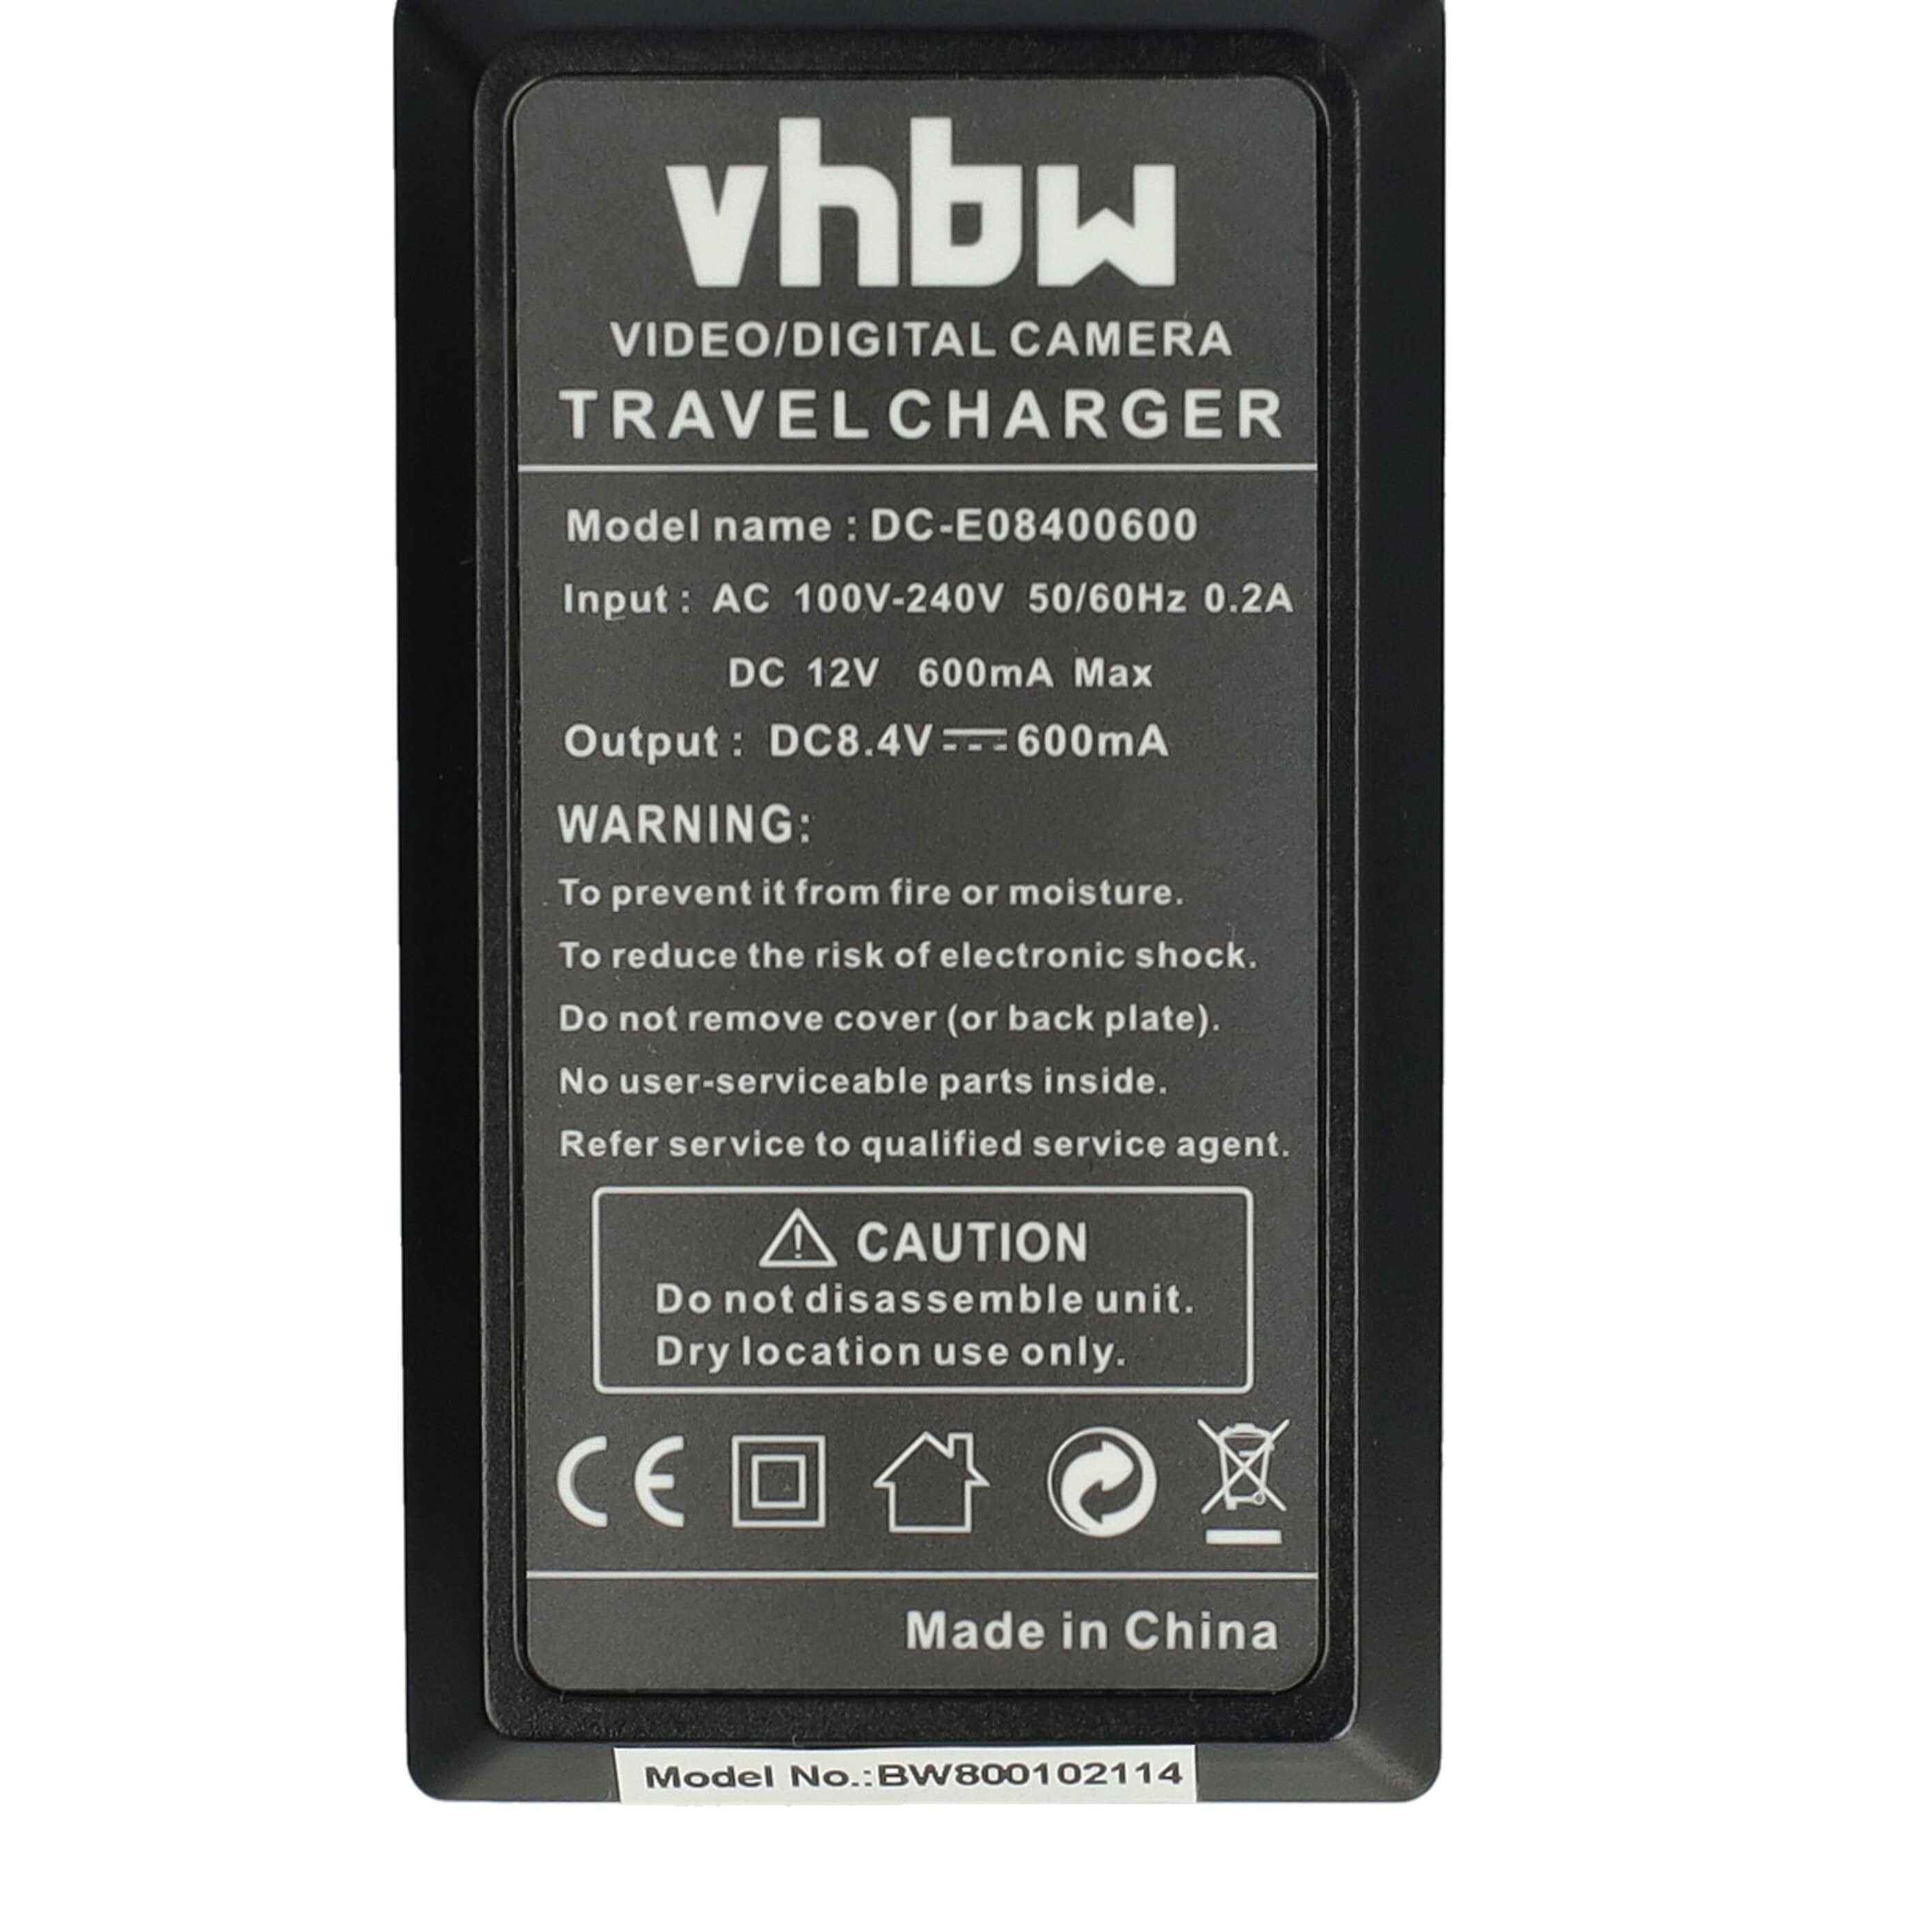 Battery Charger suitable for Samsung BP-1310 Camera etc. - 0.6 A, 8.4 V